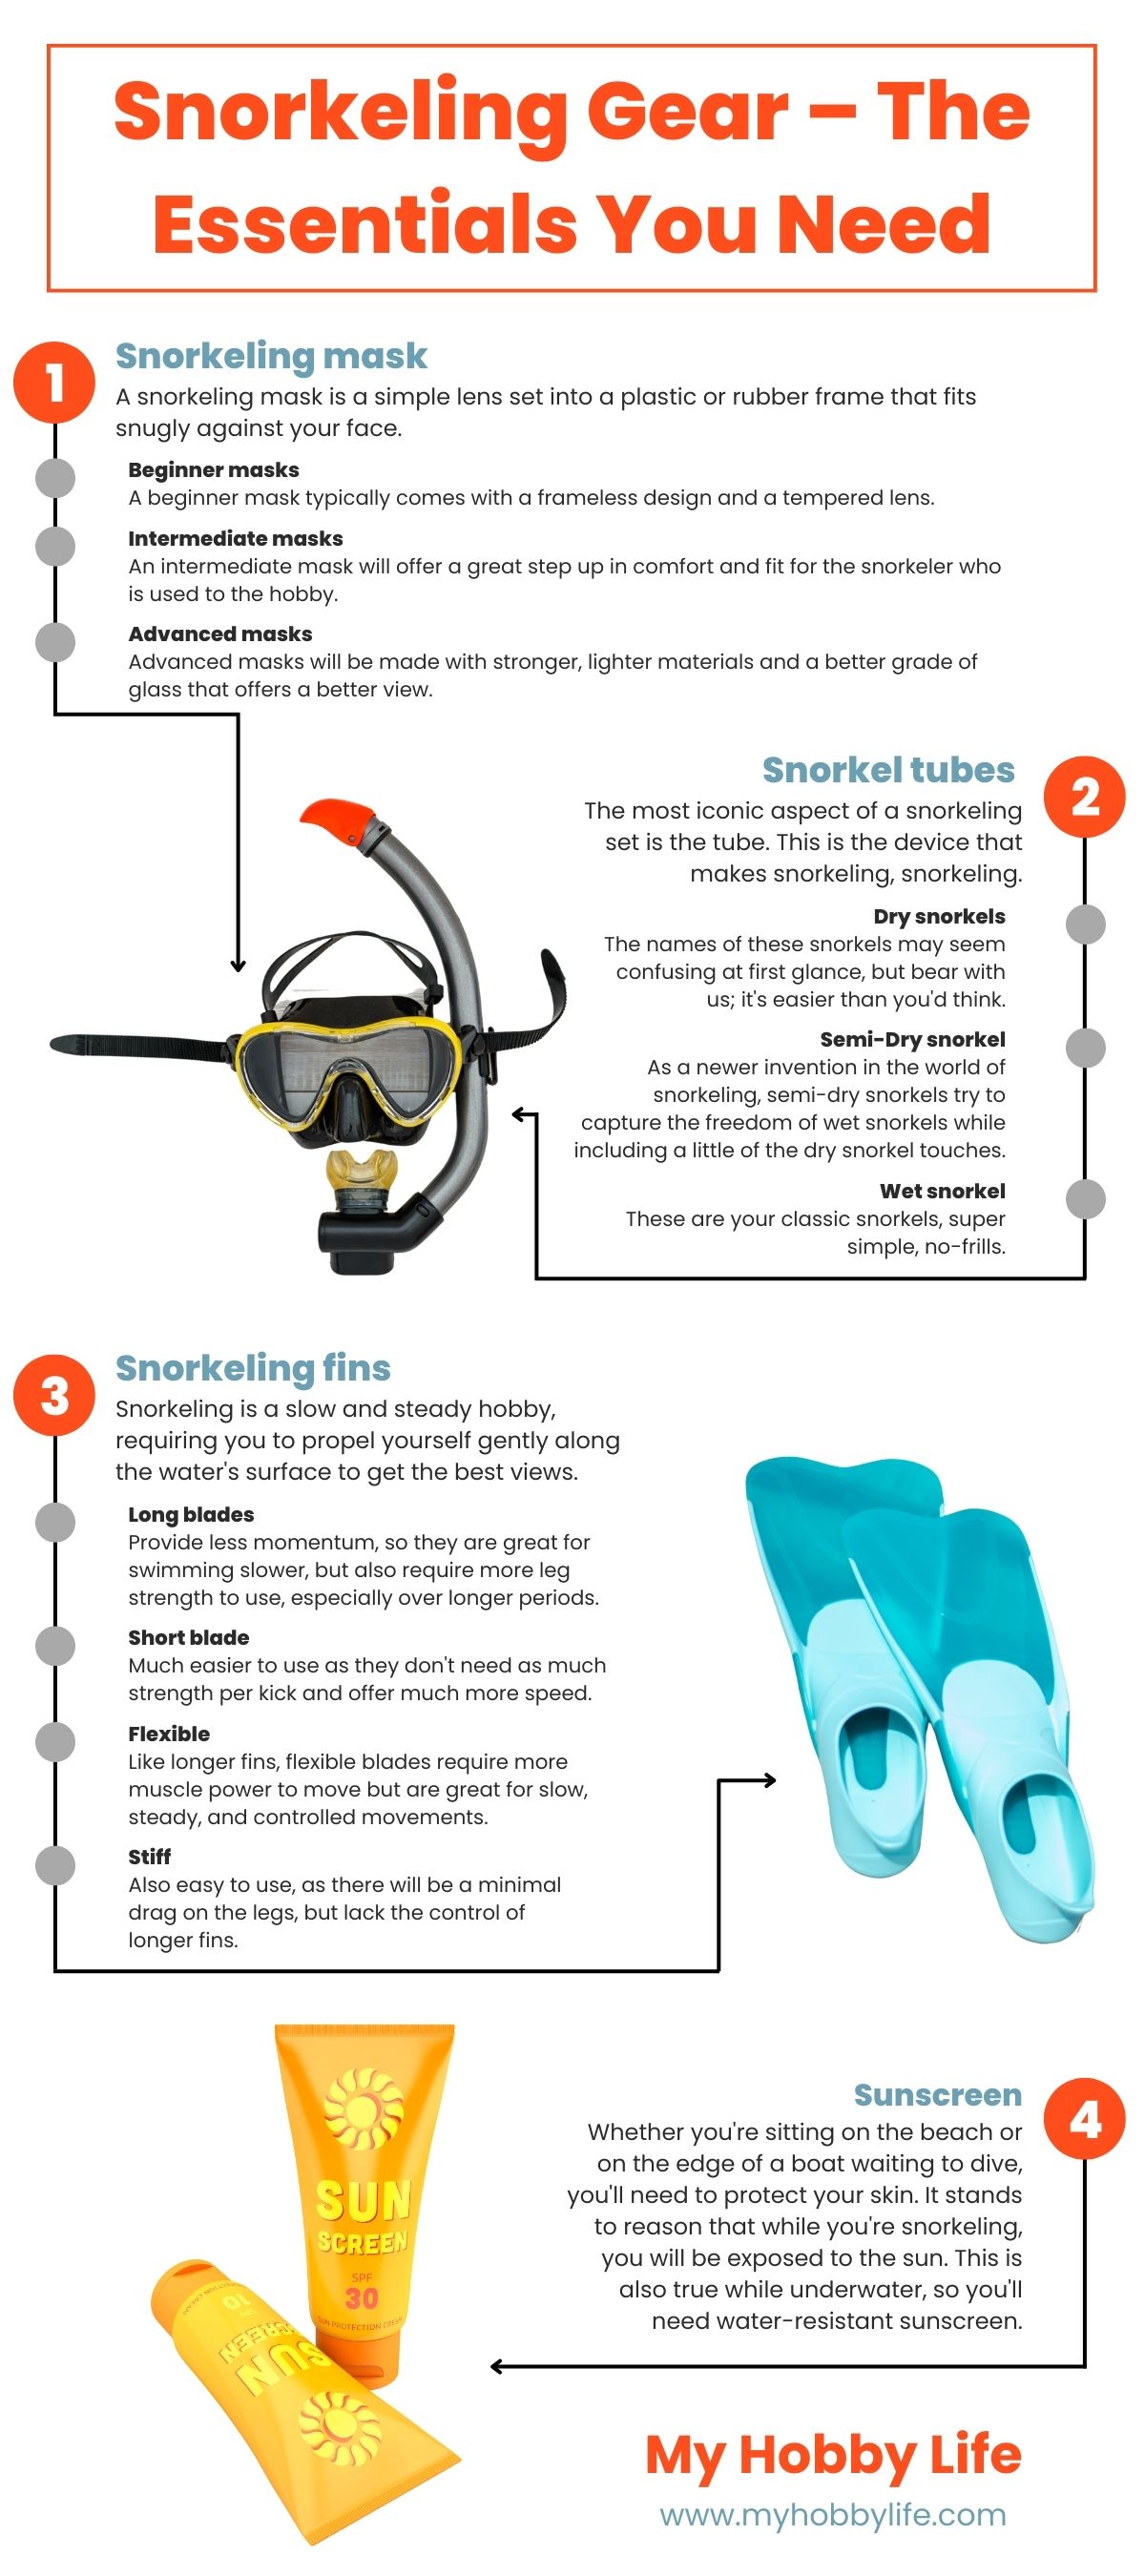 Snorkeling Gear – The Essentials You Need